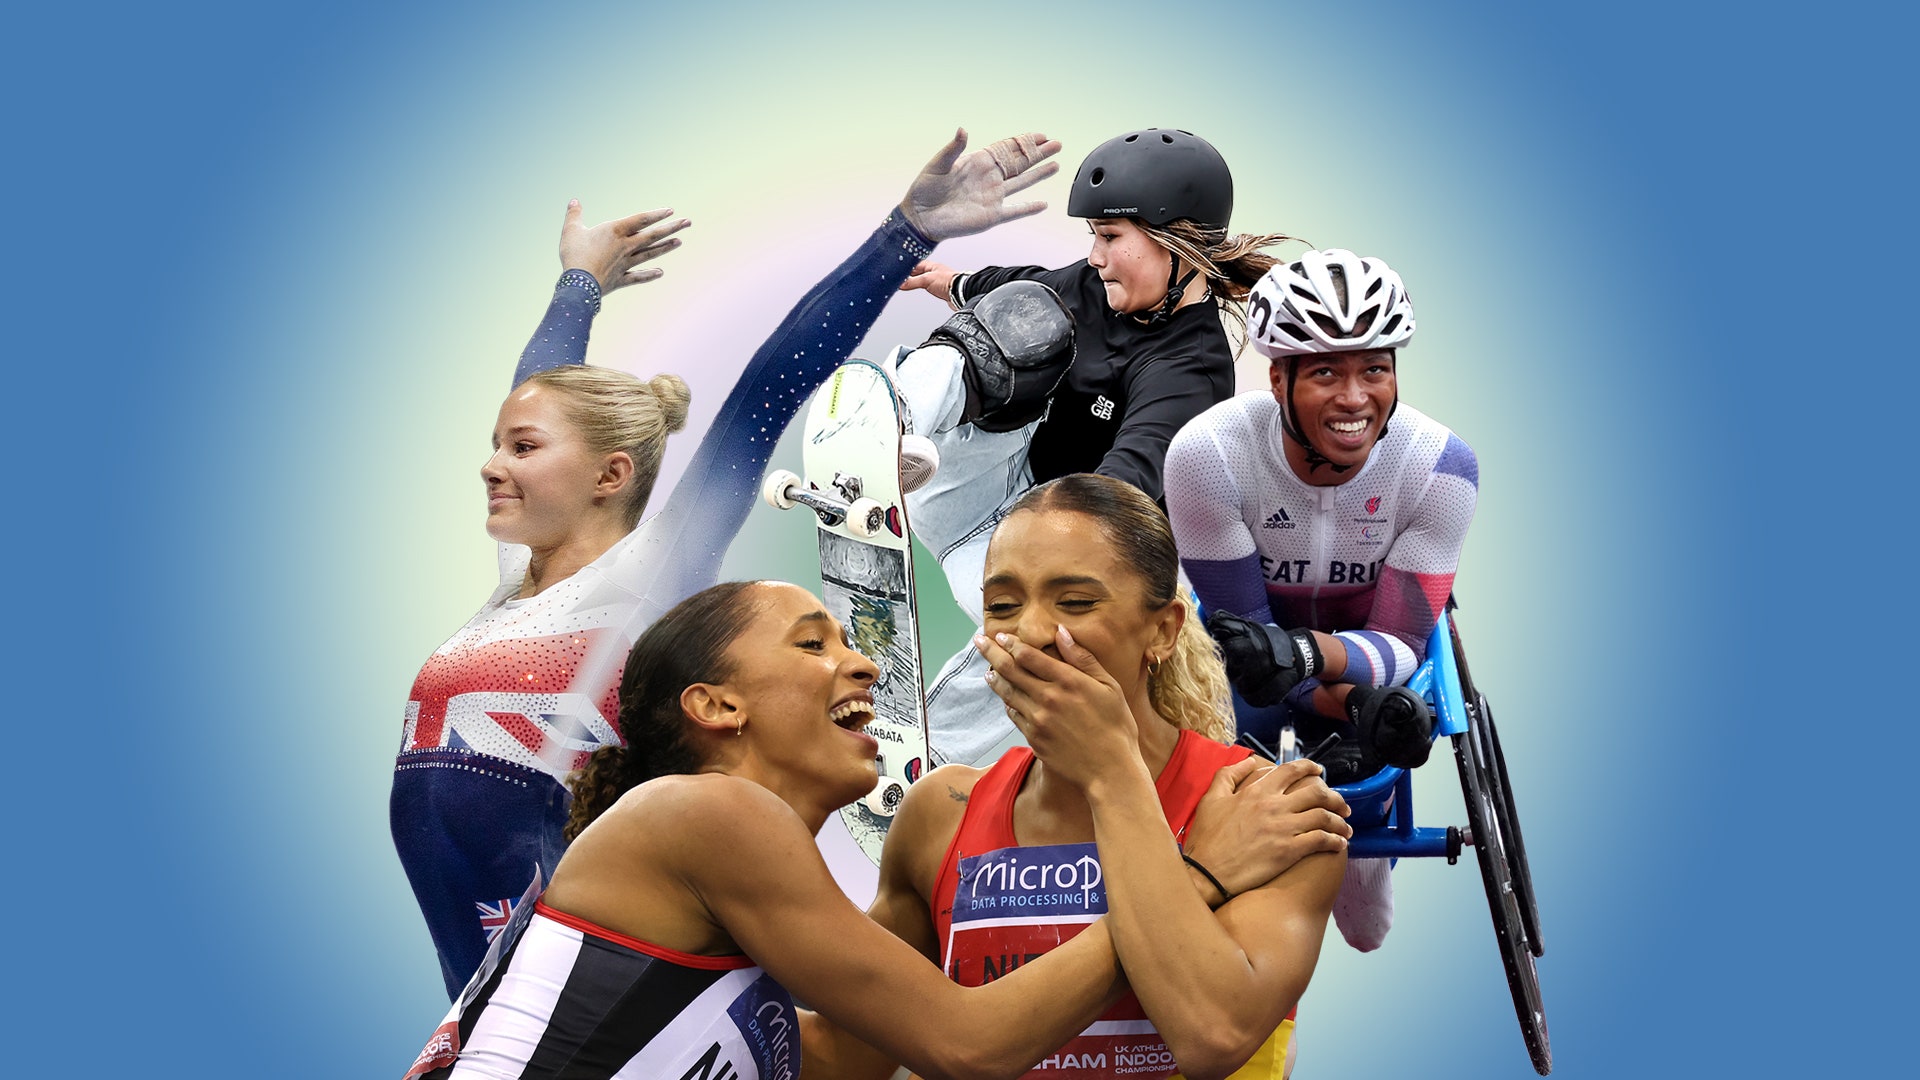 The Olympic & Paralympic Games: 20 Team GB To Watch Out For